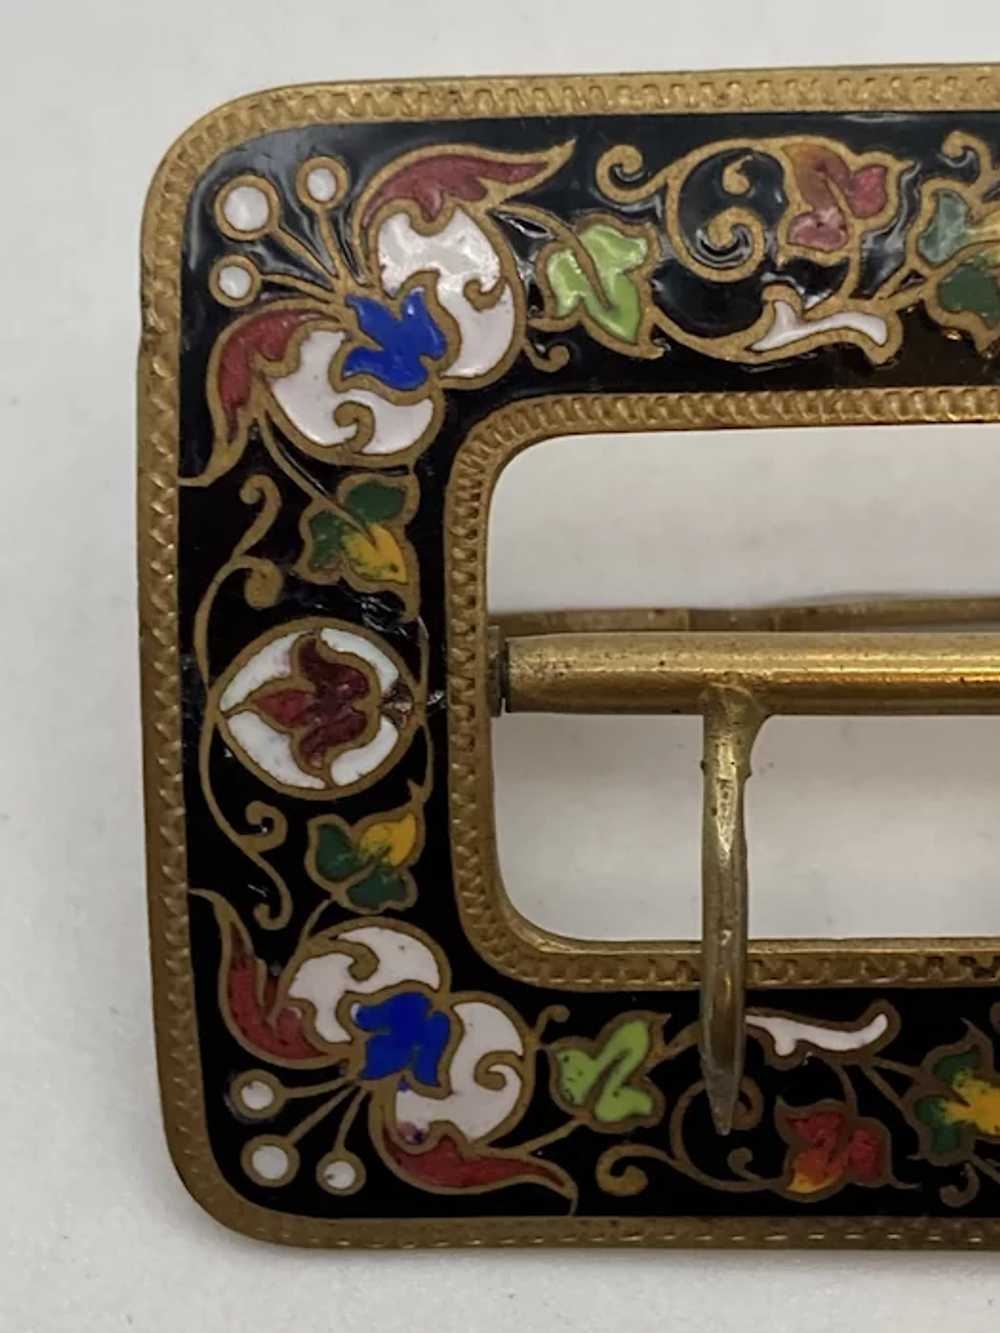 Antique Victorian Brass and Enamel Buckle - image 3